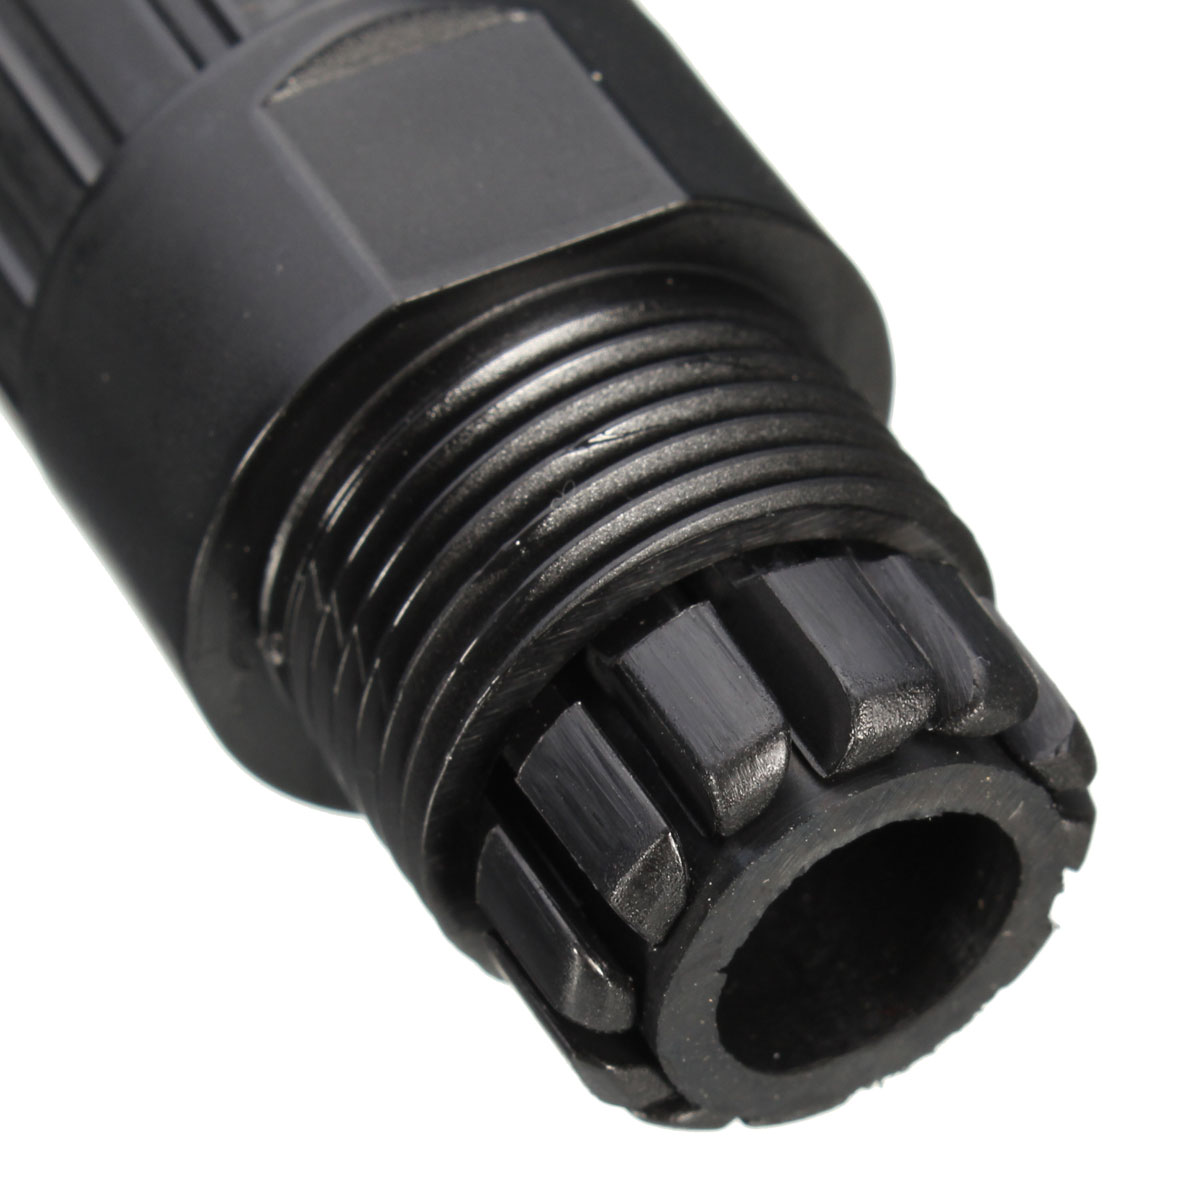 Cable-to-Cable-3-Pin-Screw-Locking-Wire-IP68-Waterproof-Connector-M20x15-CE-1040862-4